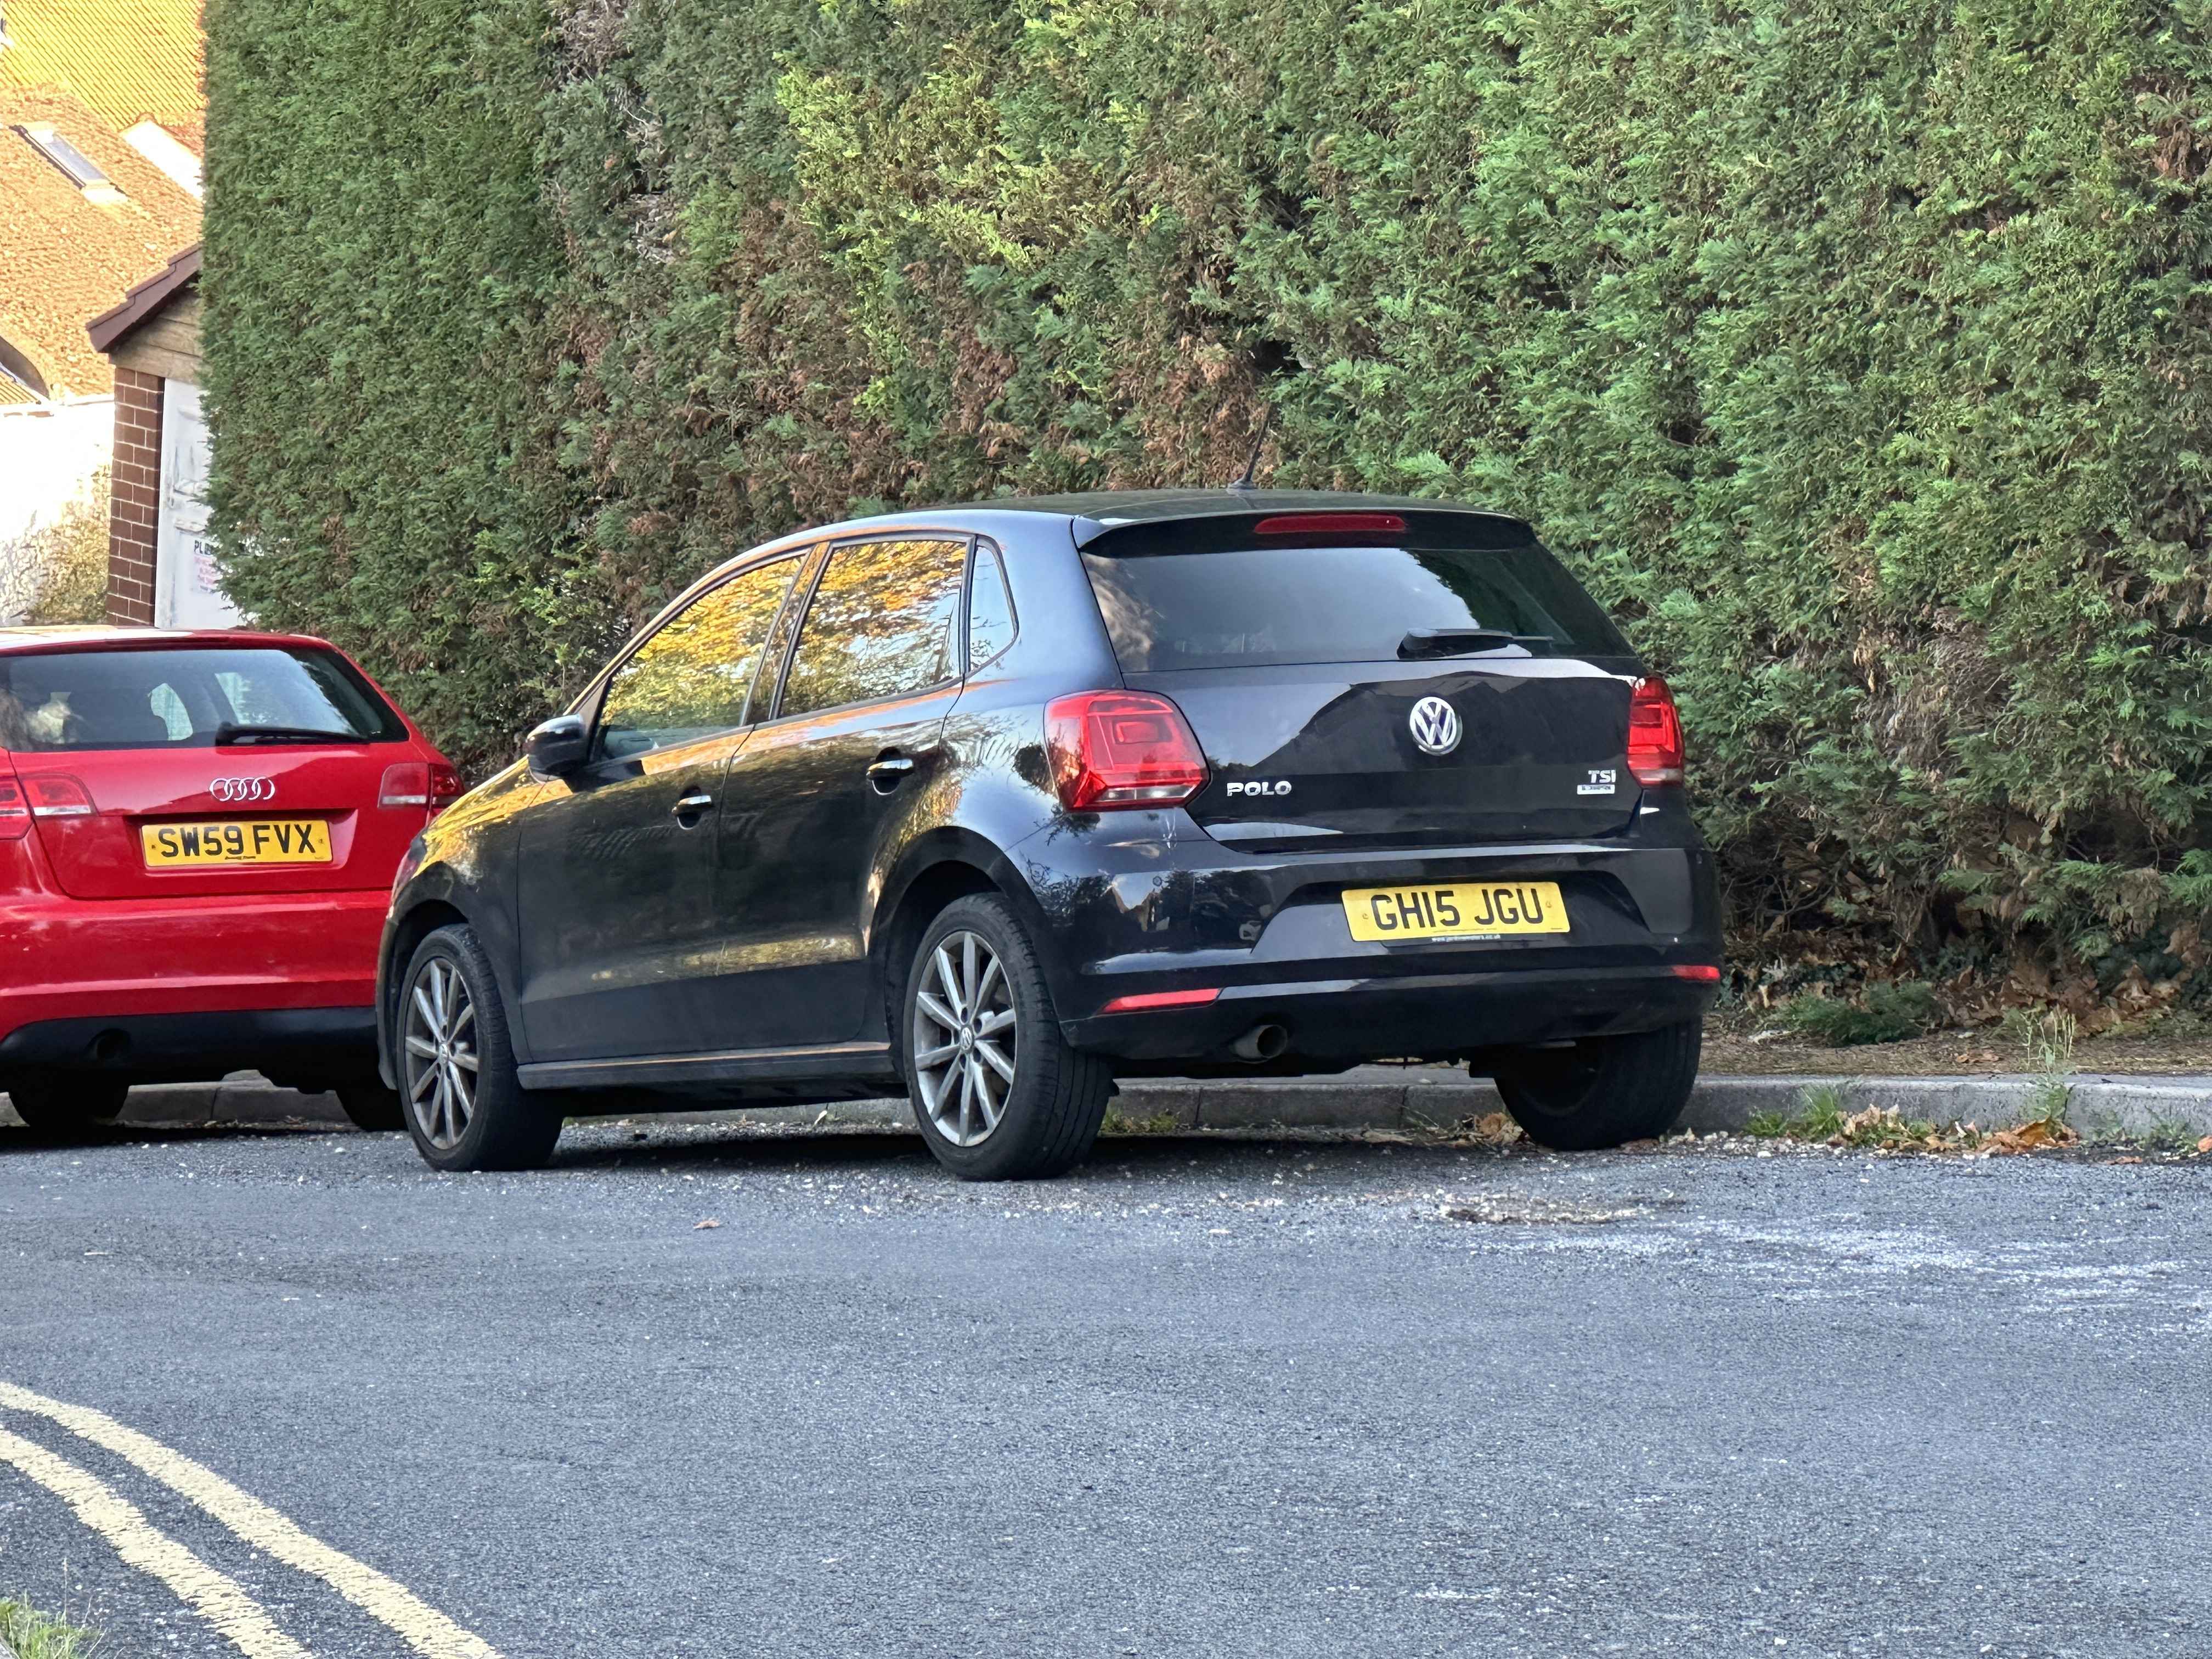 Photograph of GH15 JGU - a Black Volkswagen Polo parked in Hollingdean by a non-resident. The second of three photographs supplied by the residents of Hollingdean.